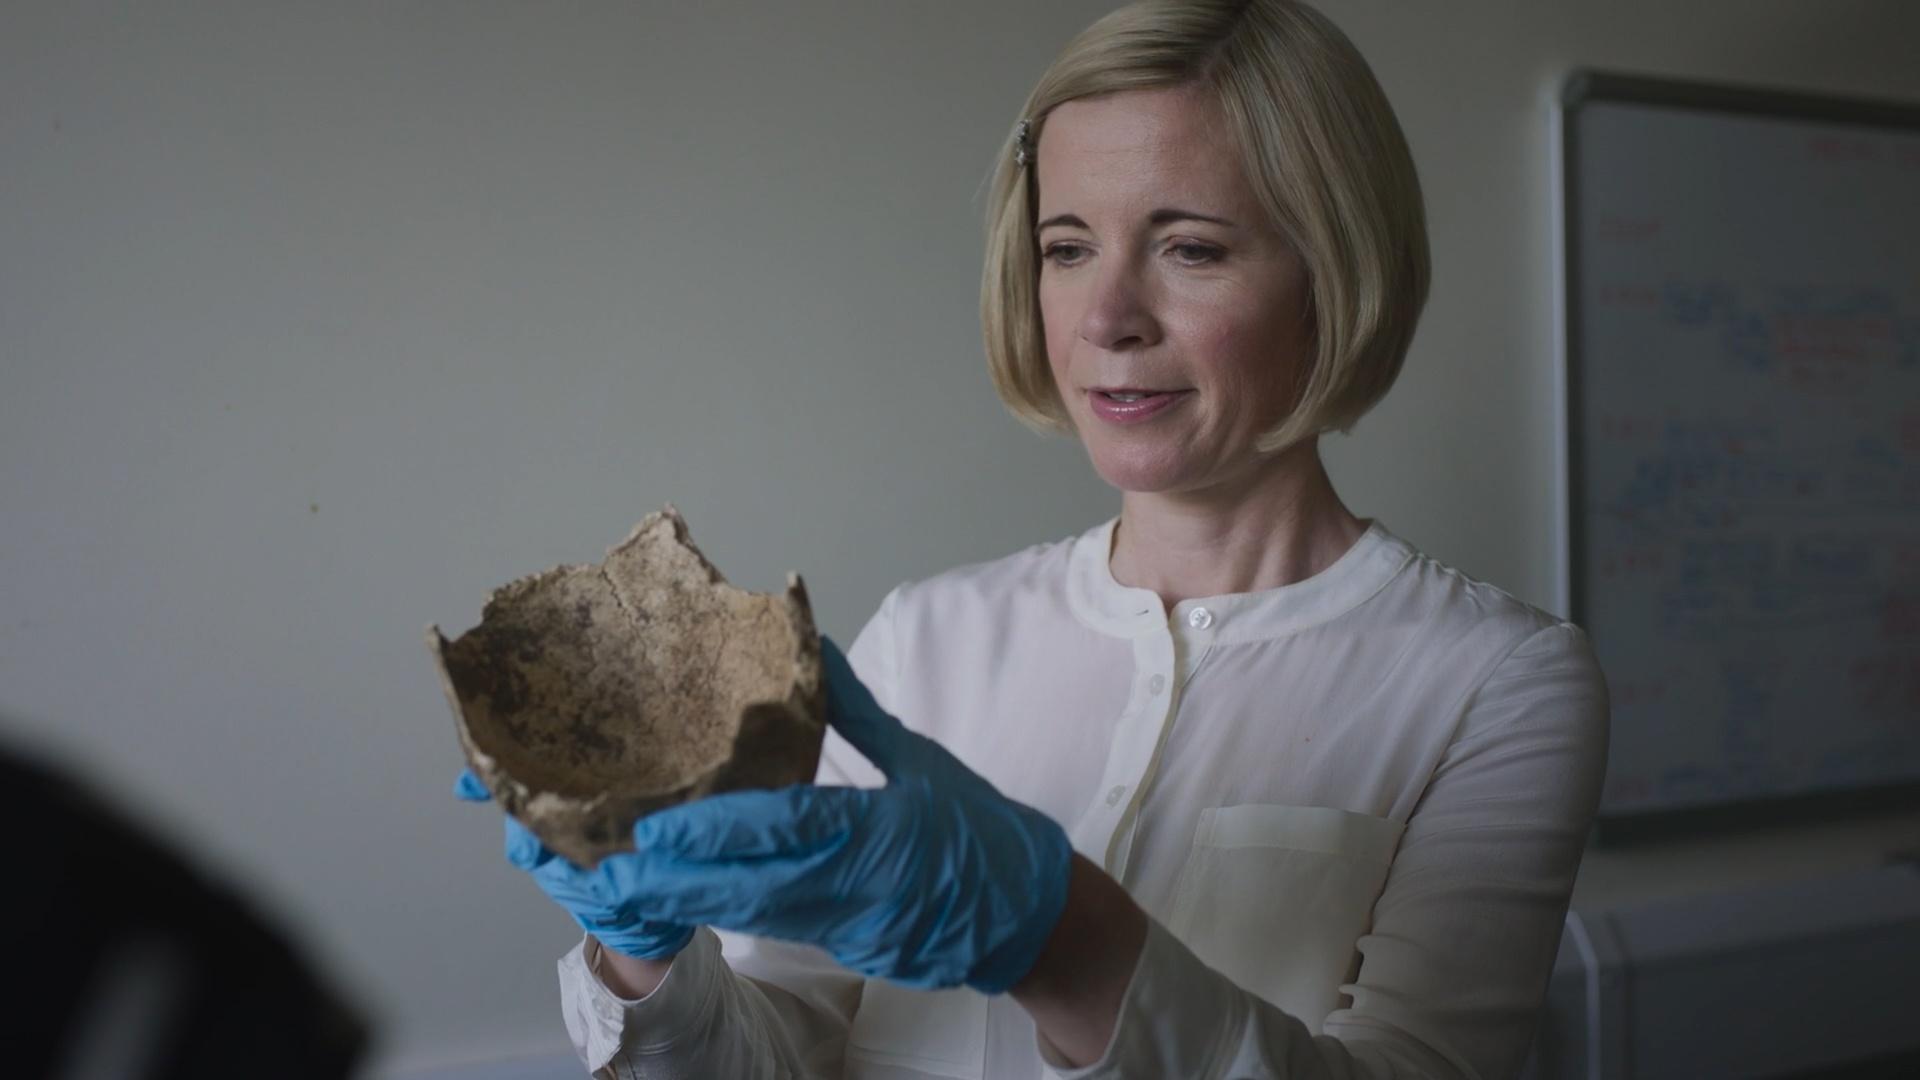 Lucy holding a skull from a set of human remains sent to Turi King at Leicester University.